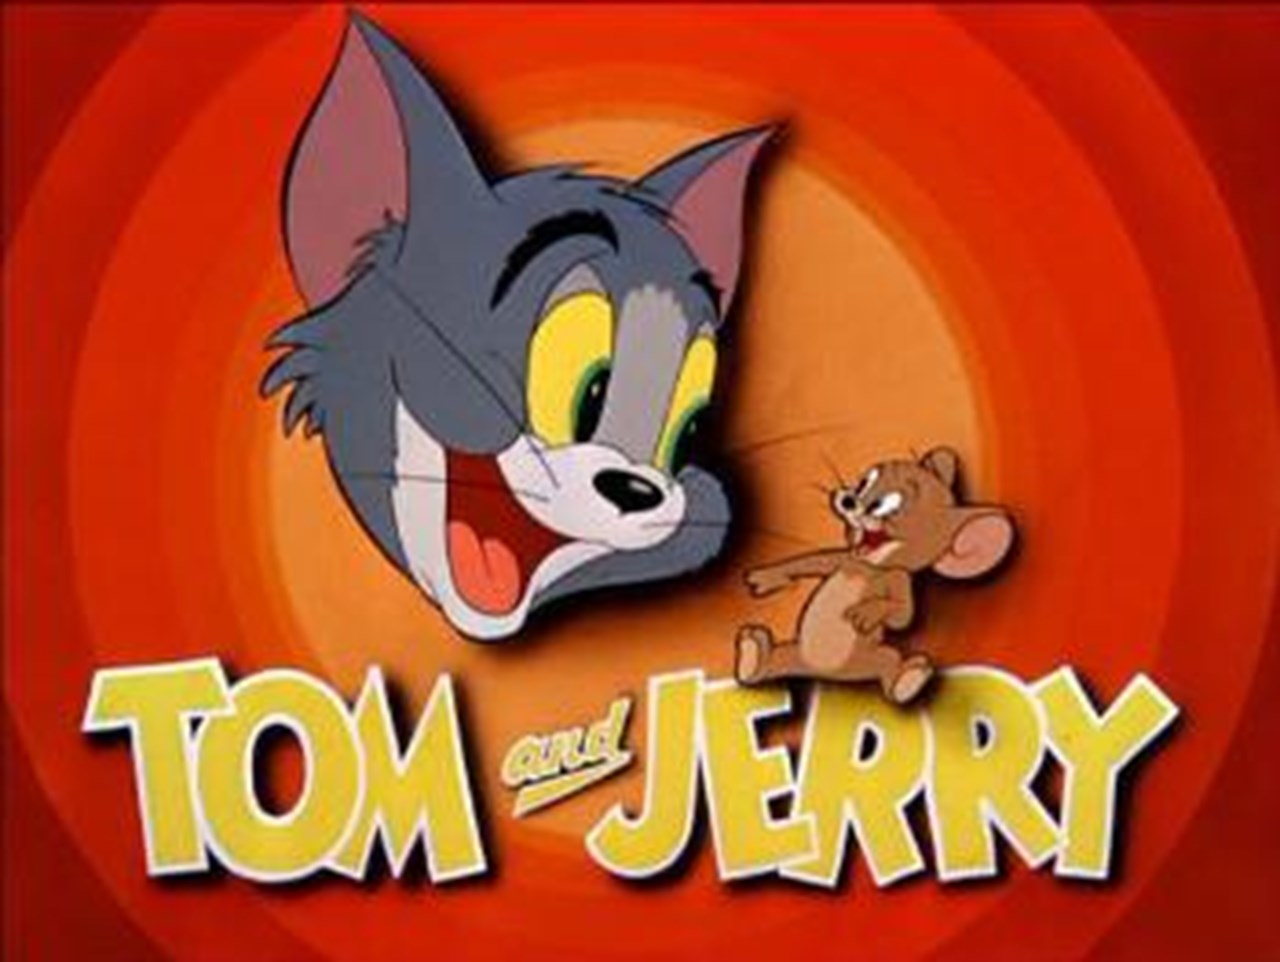 Tom and Jerry movie cast revealed, get other latest updates on it |  Entertainment